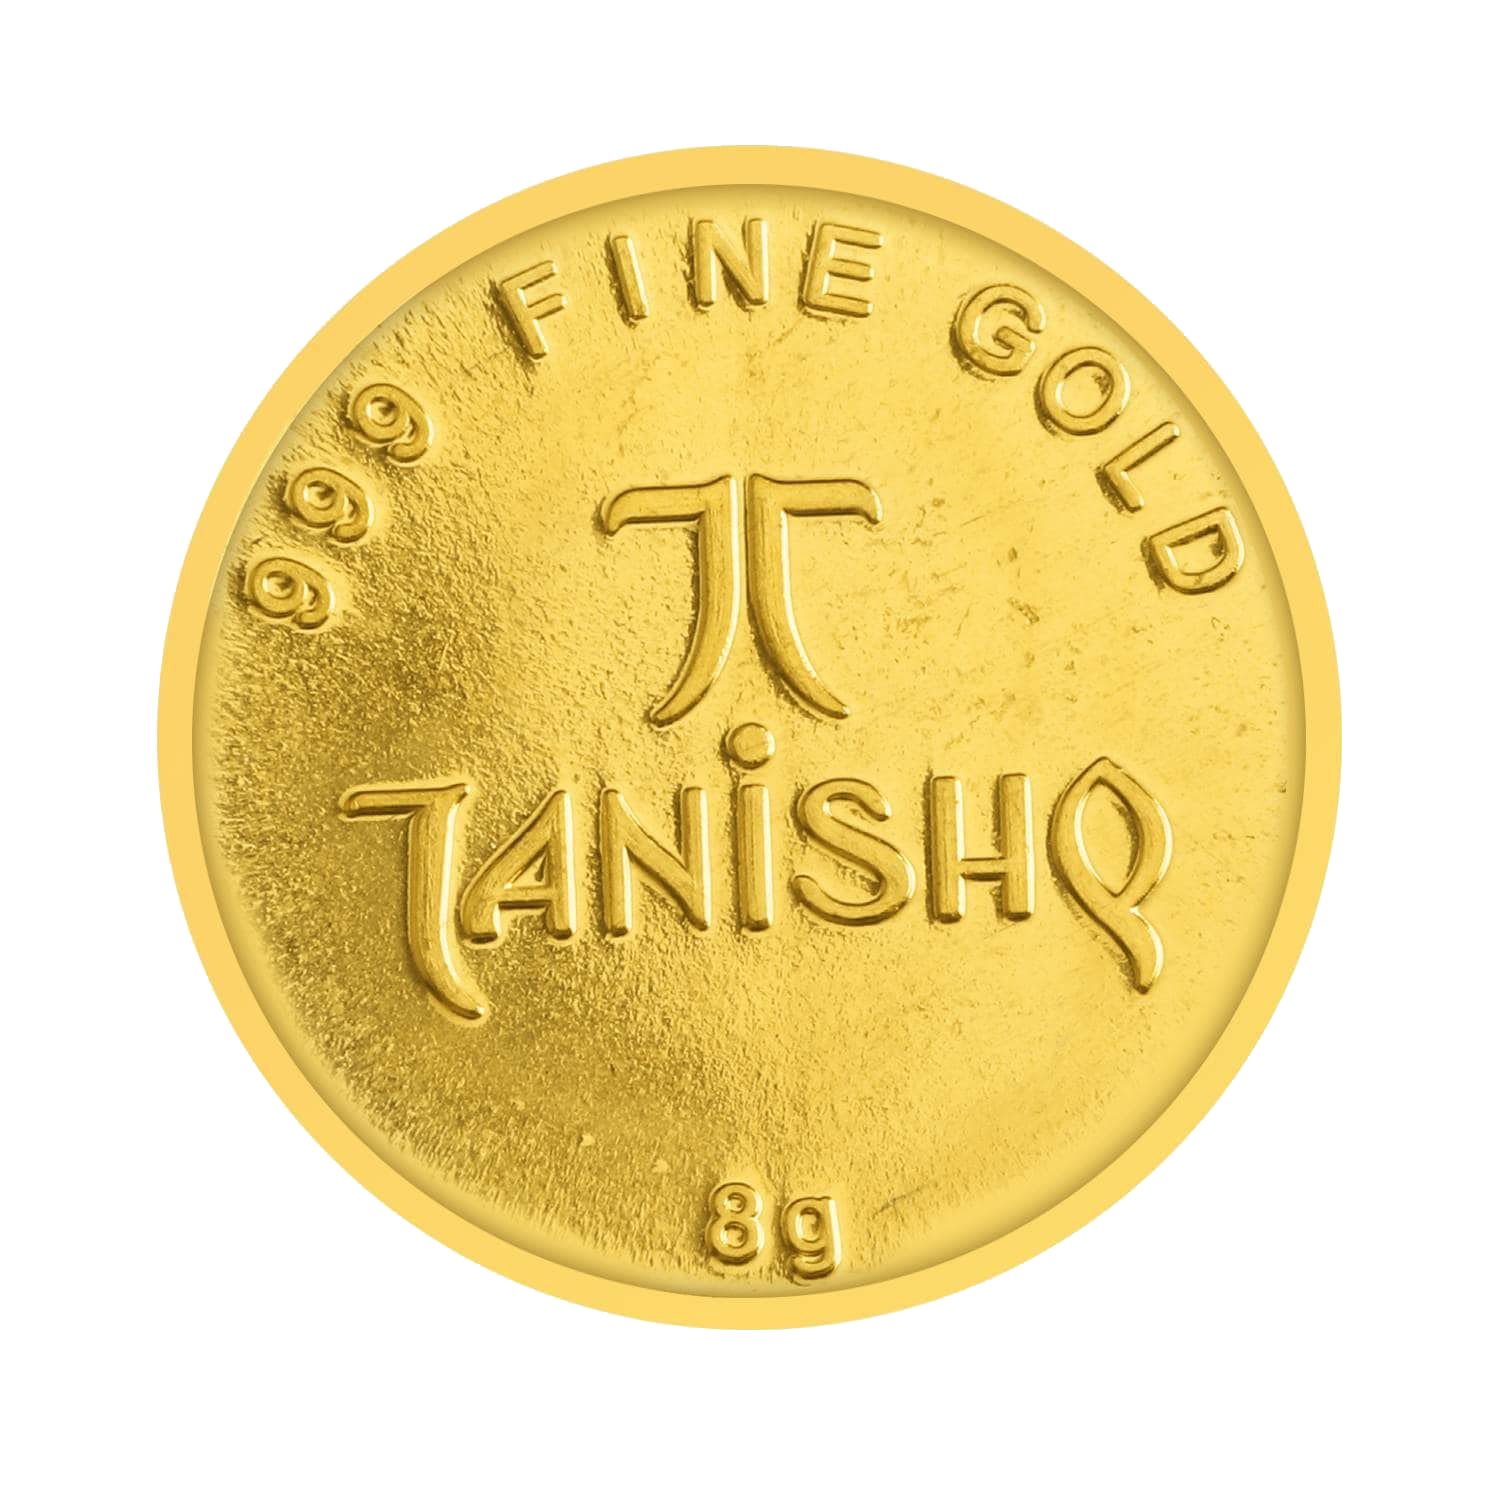 Gold Coin PNG Free Image